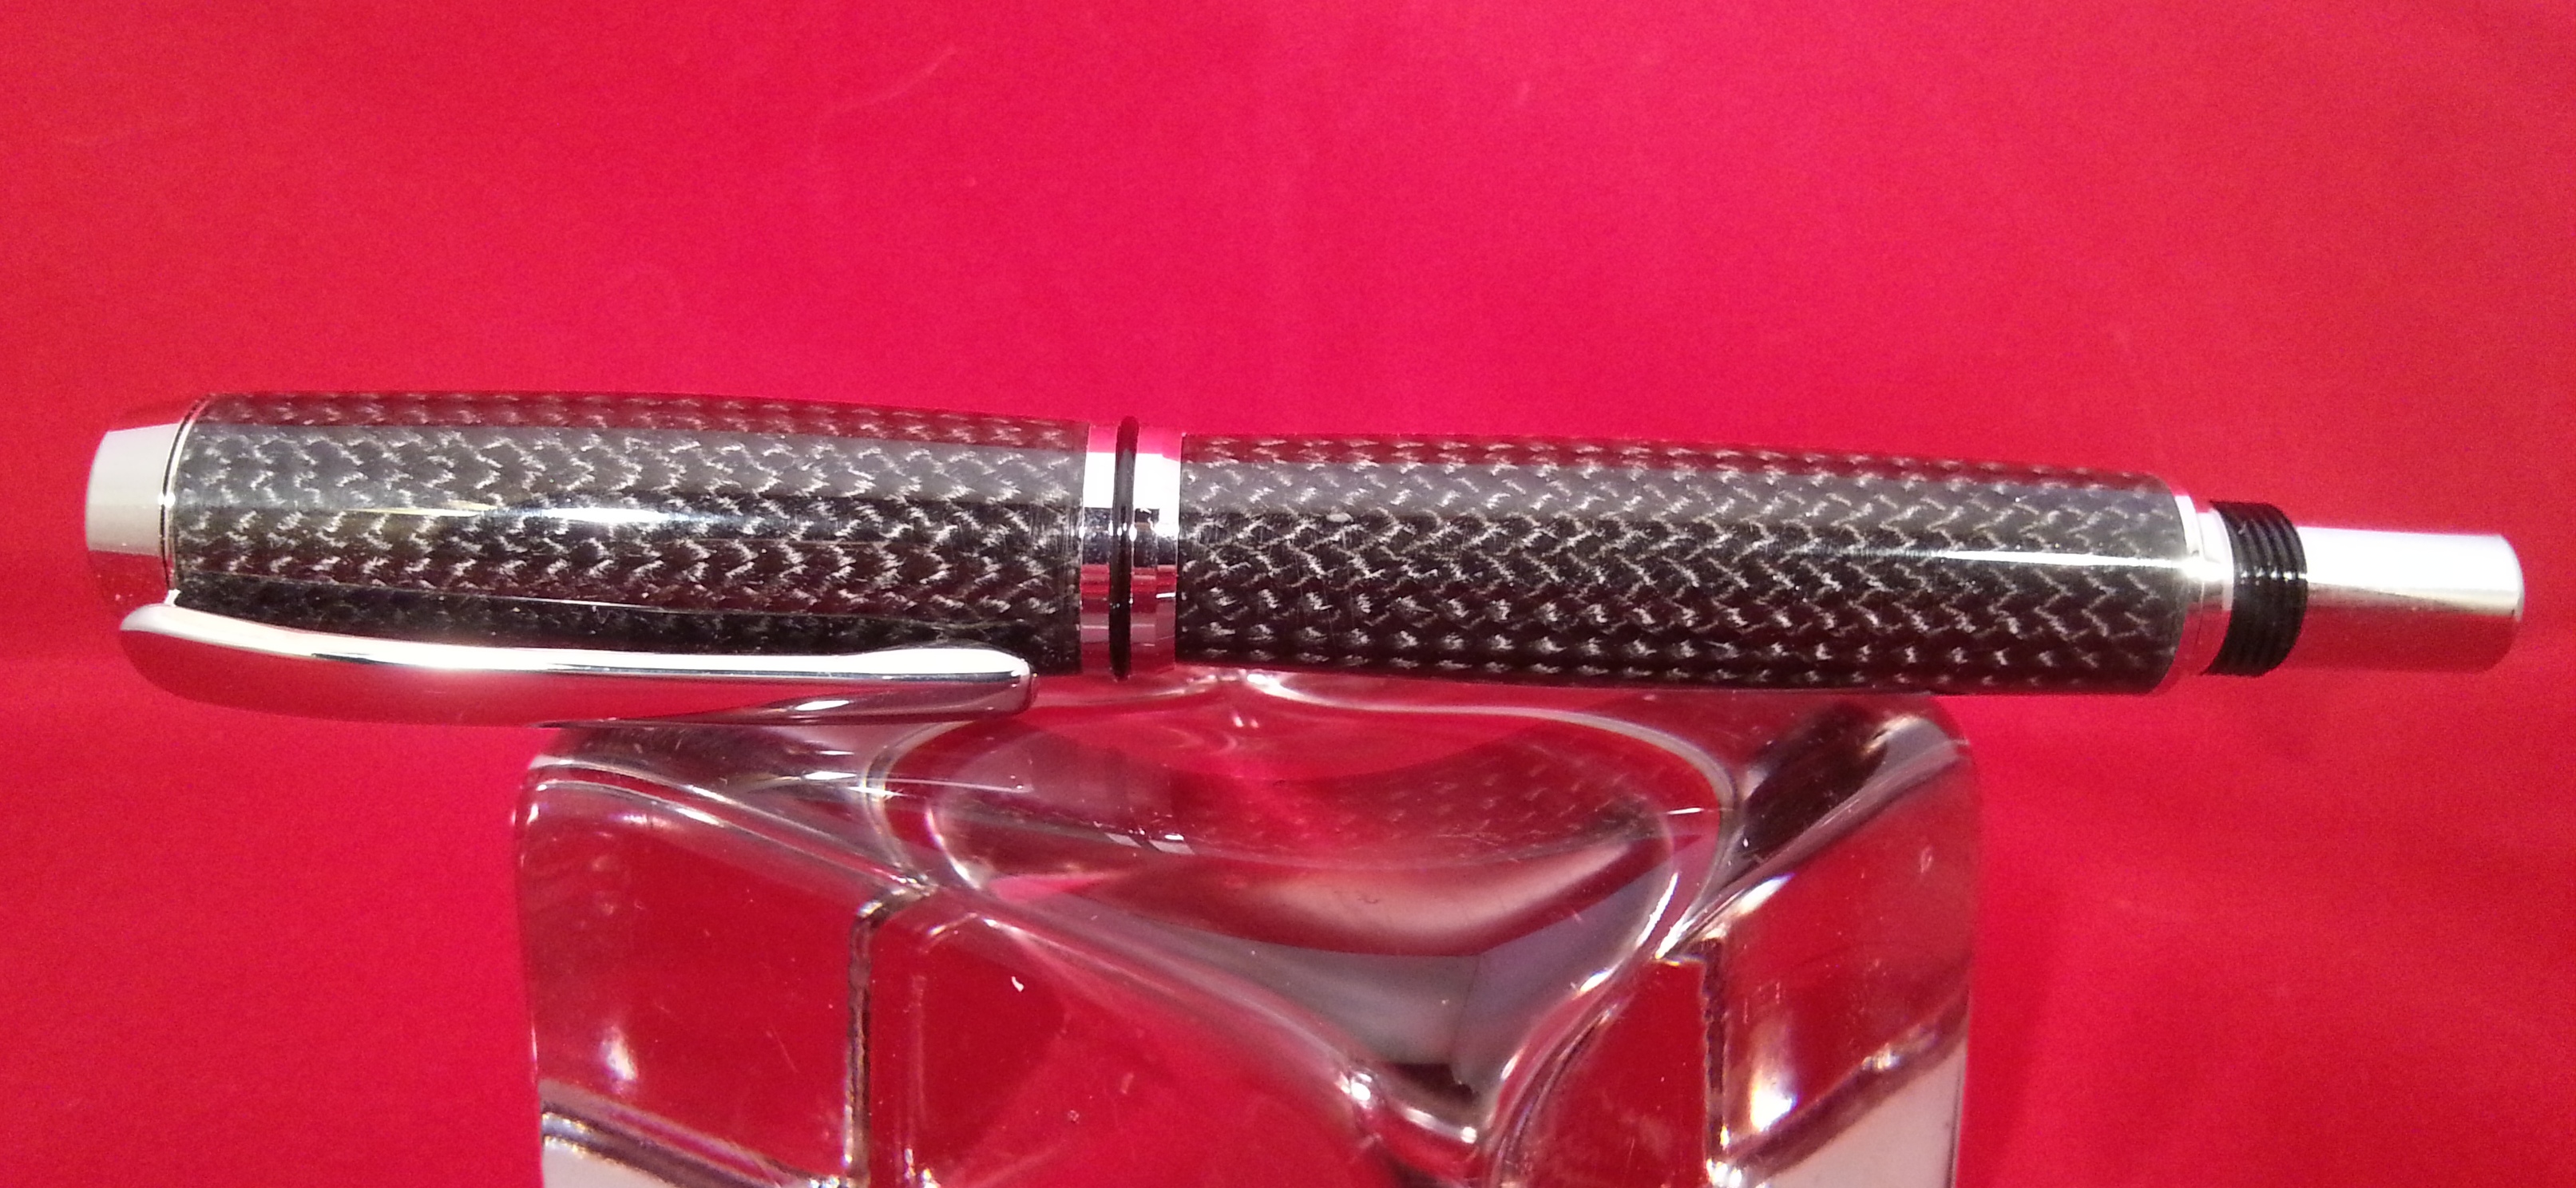 Baron Rollerball with Carbon Fiber